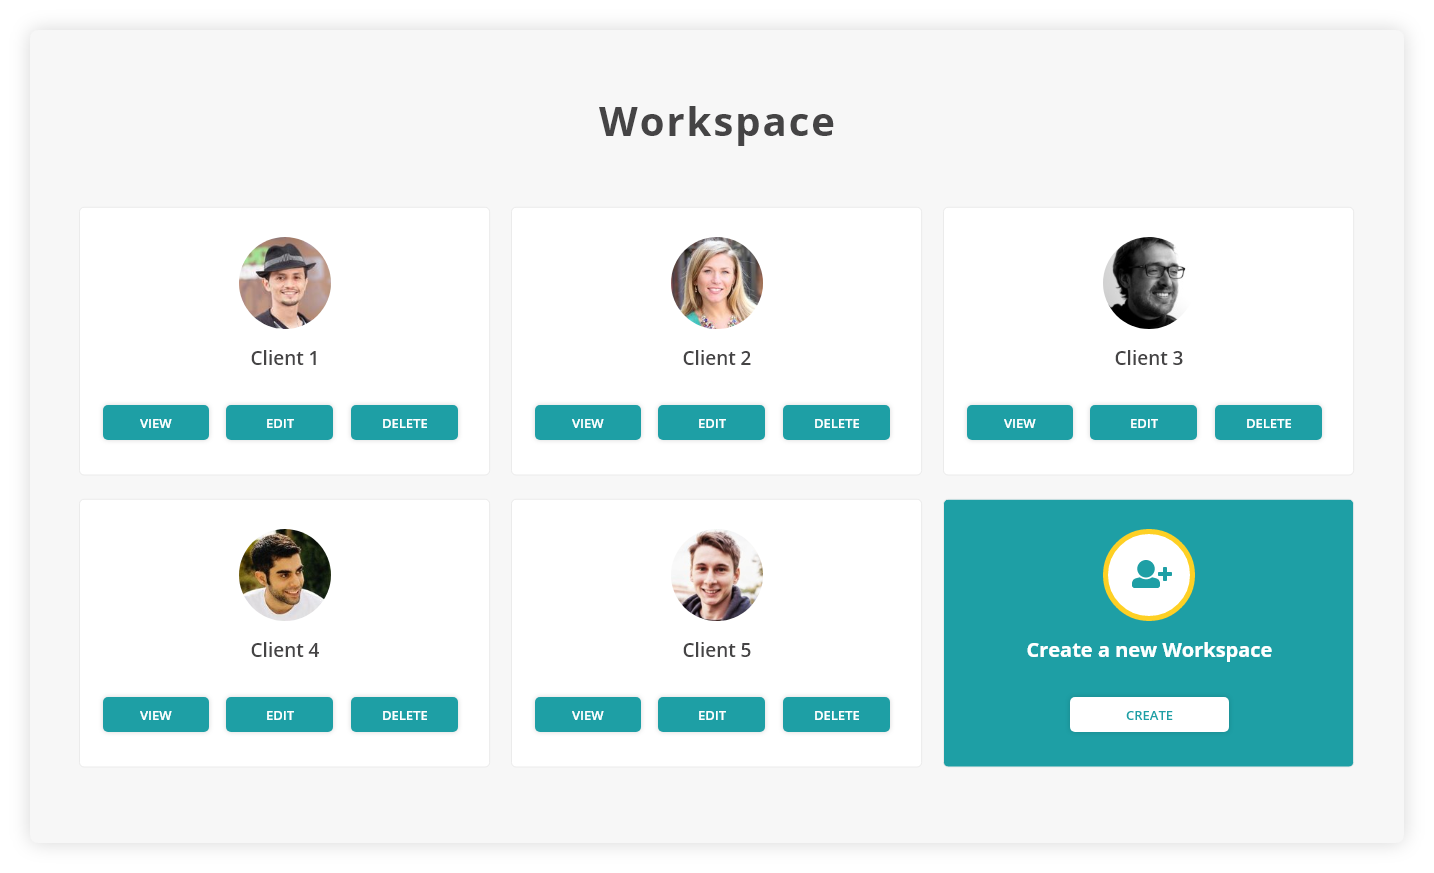 recurpost allows to create separate workspaces for every client